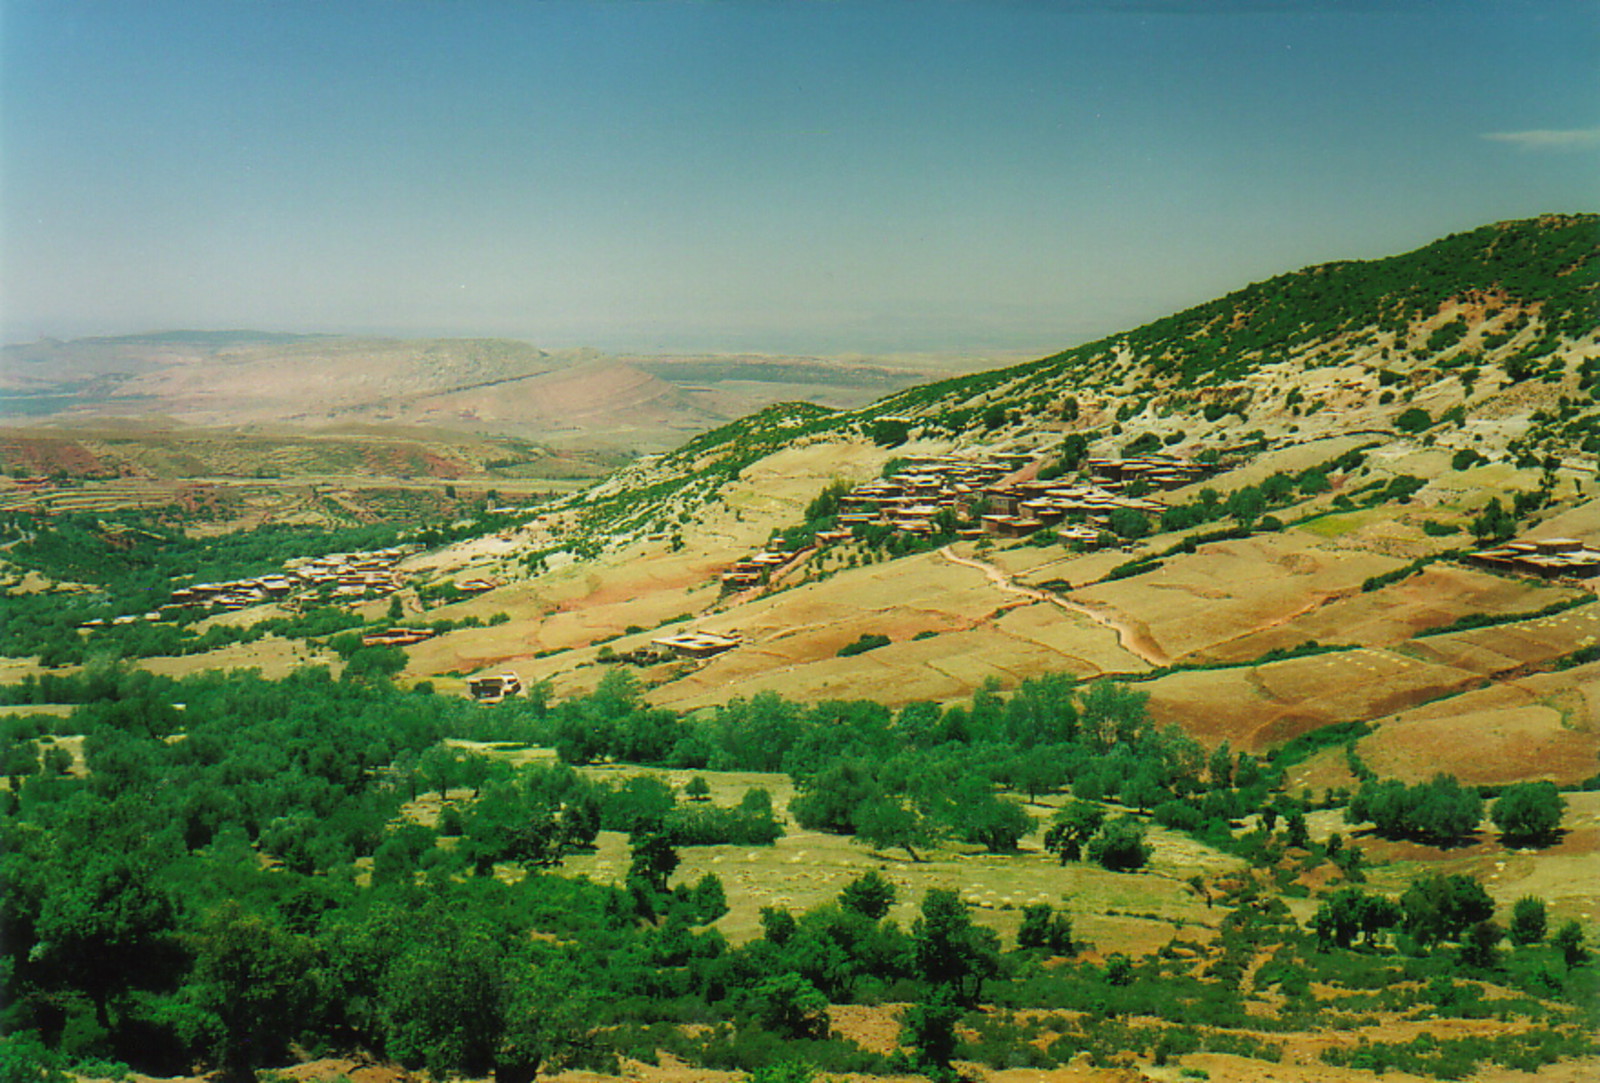 A village in the foothills of the Atlas Mountains